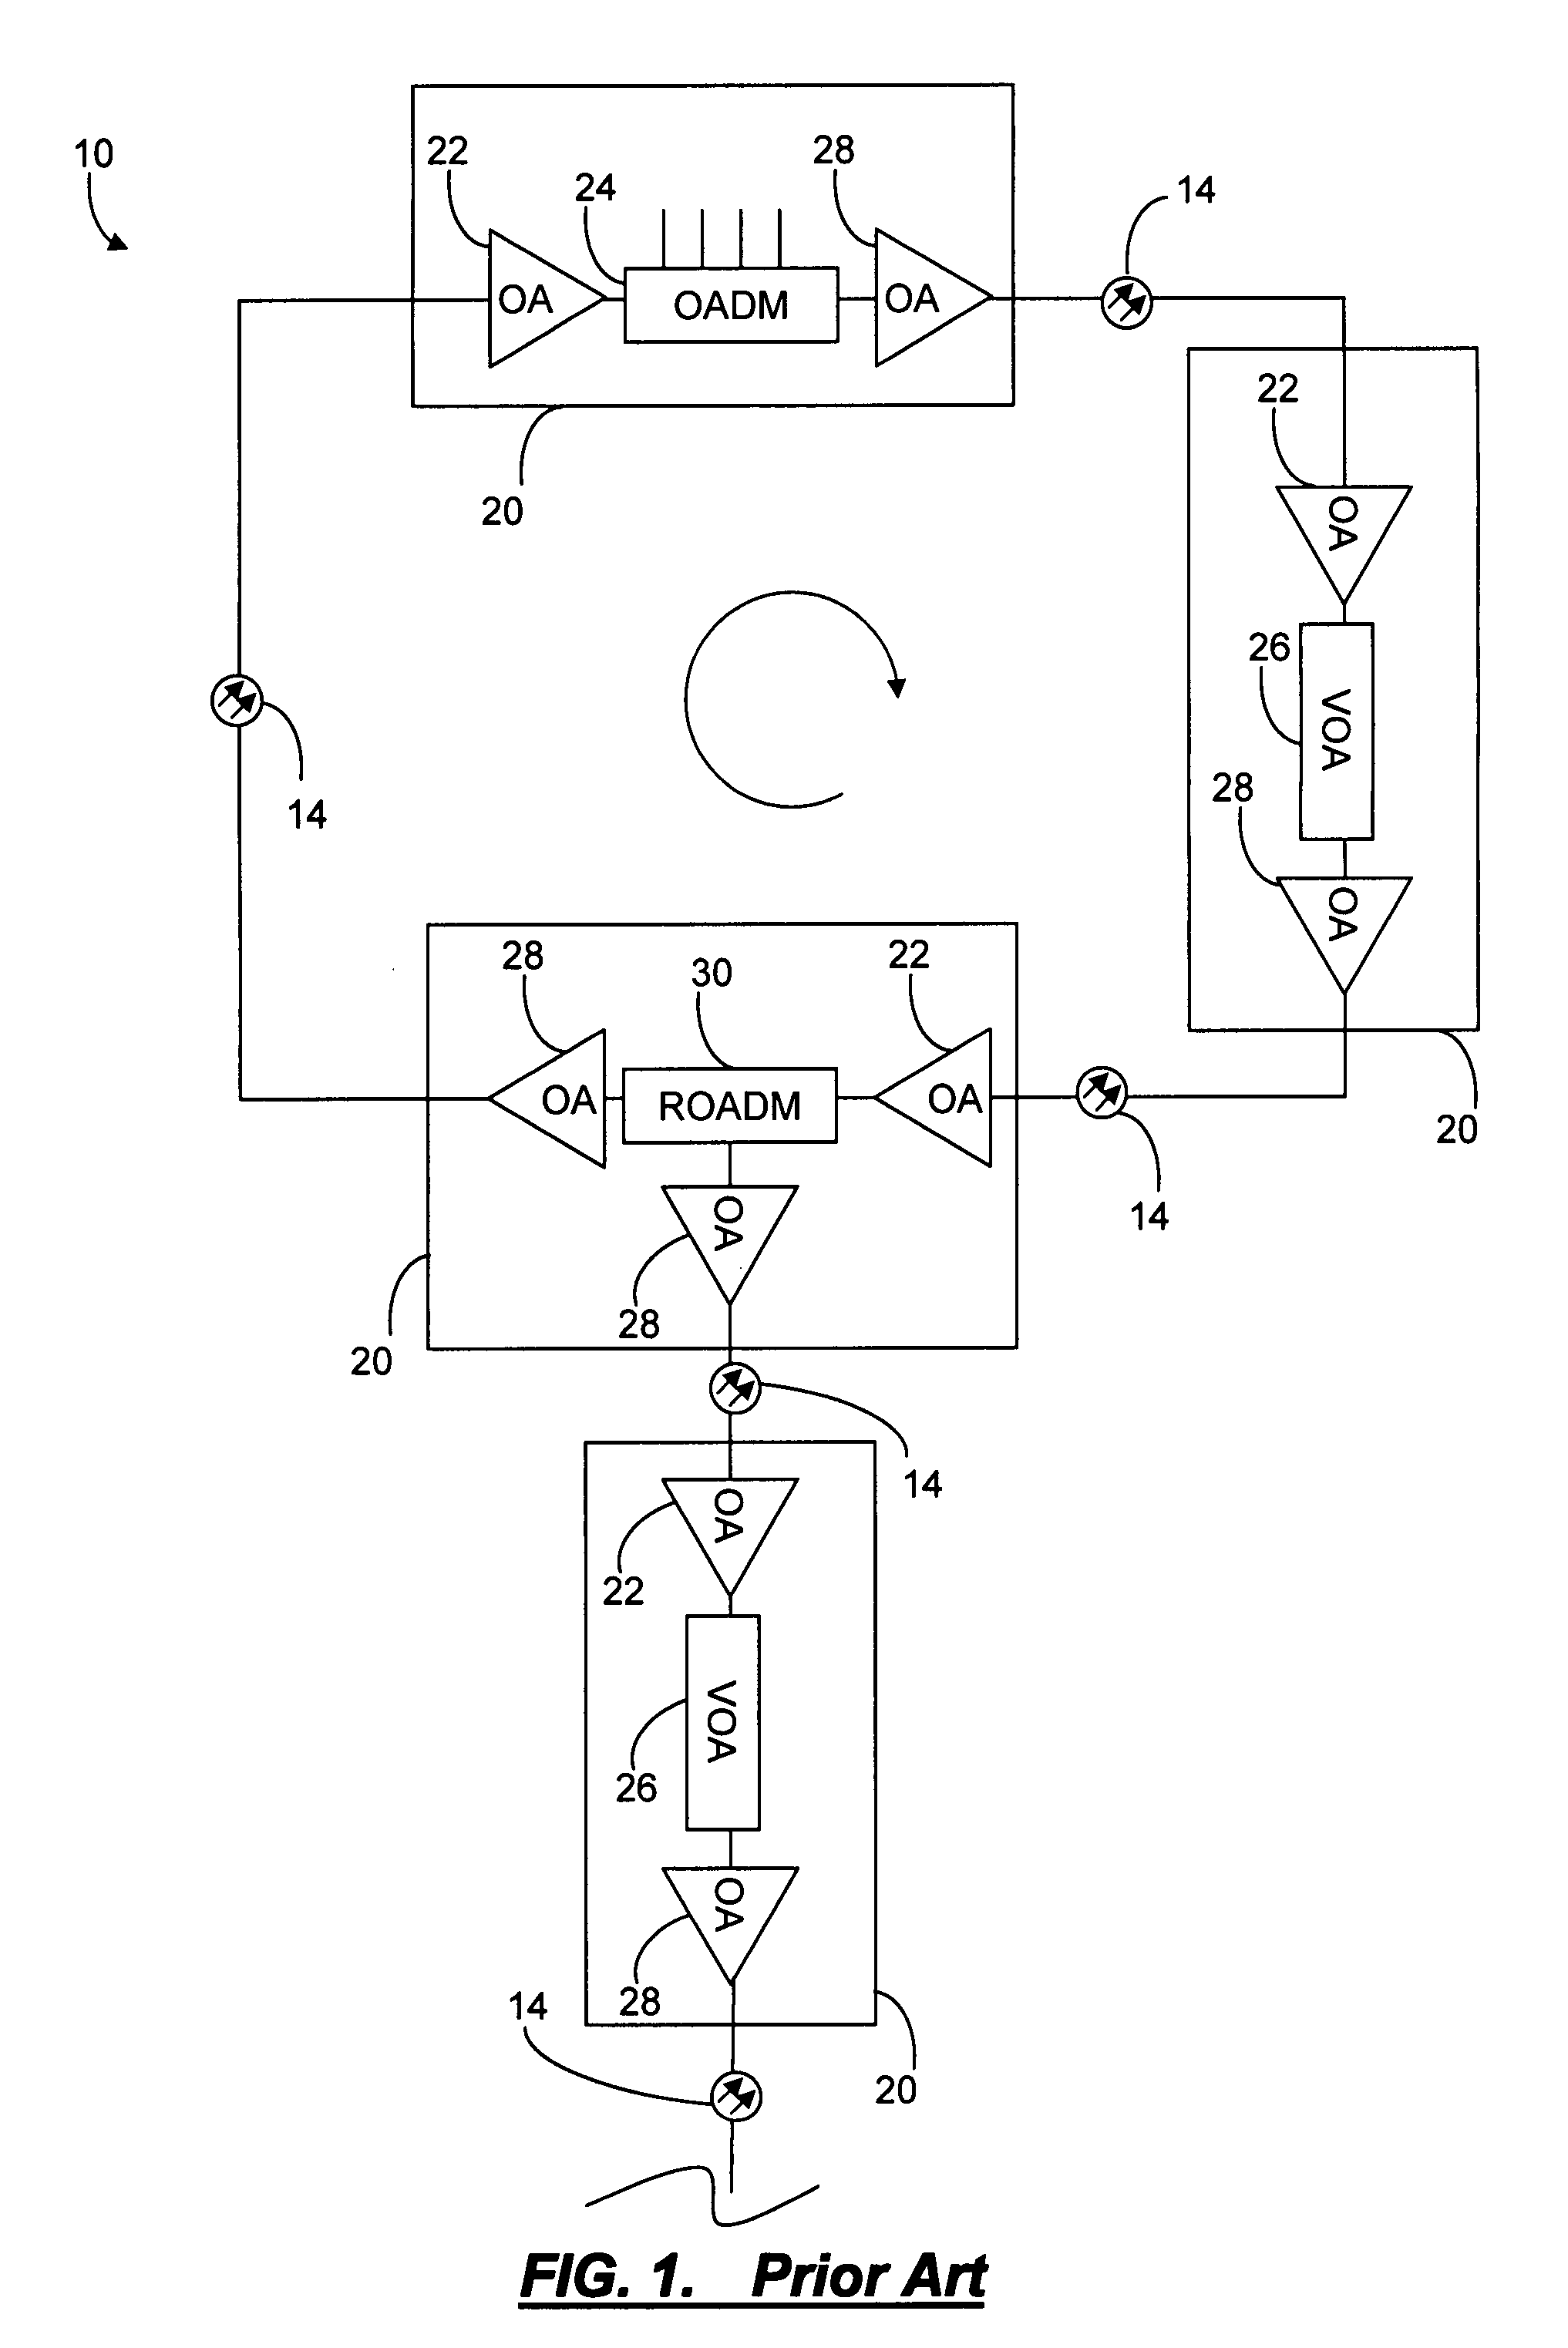 Systems and methods for a multiple-input, multiple-output controller in a reconfigurable optical network